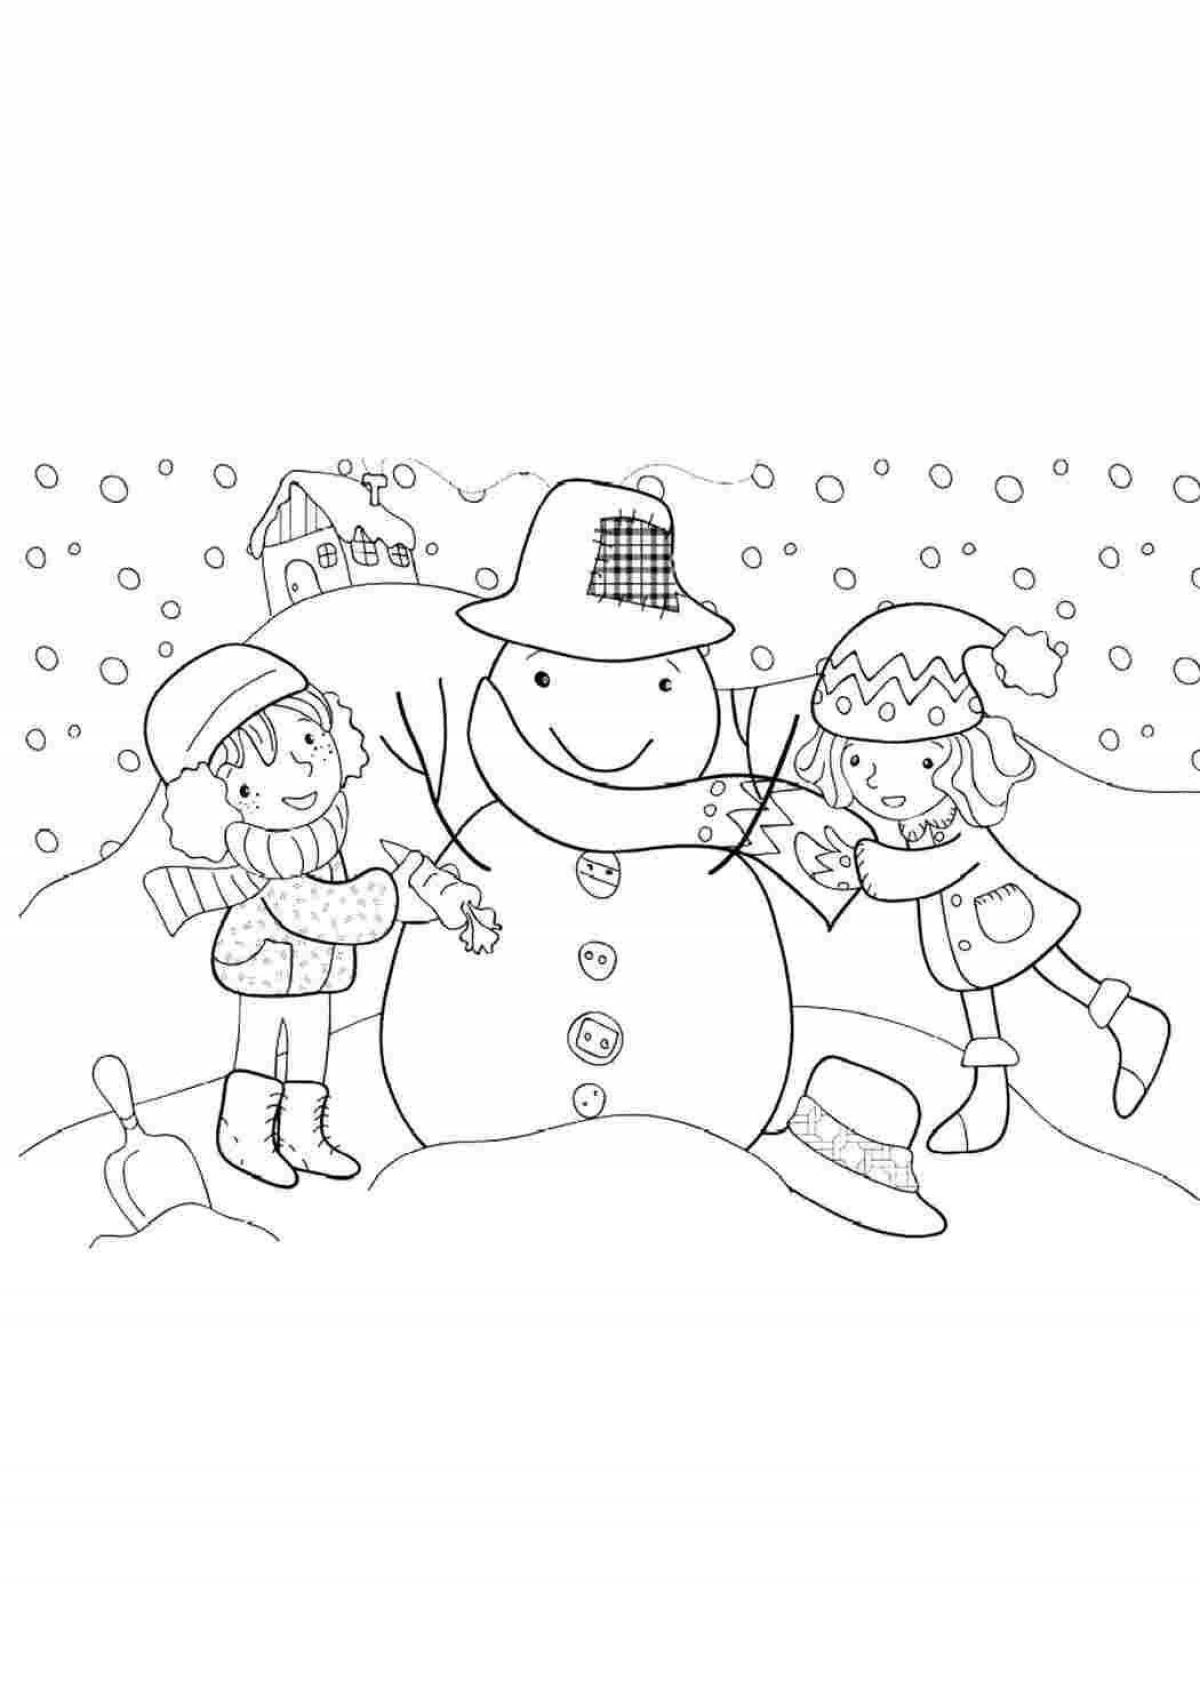 Children's winter holiday coloring book for kids